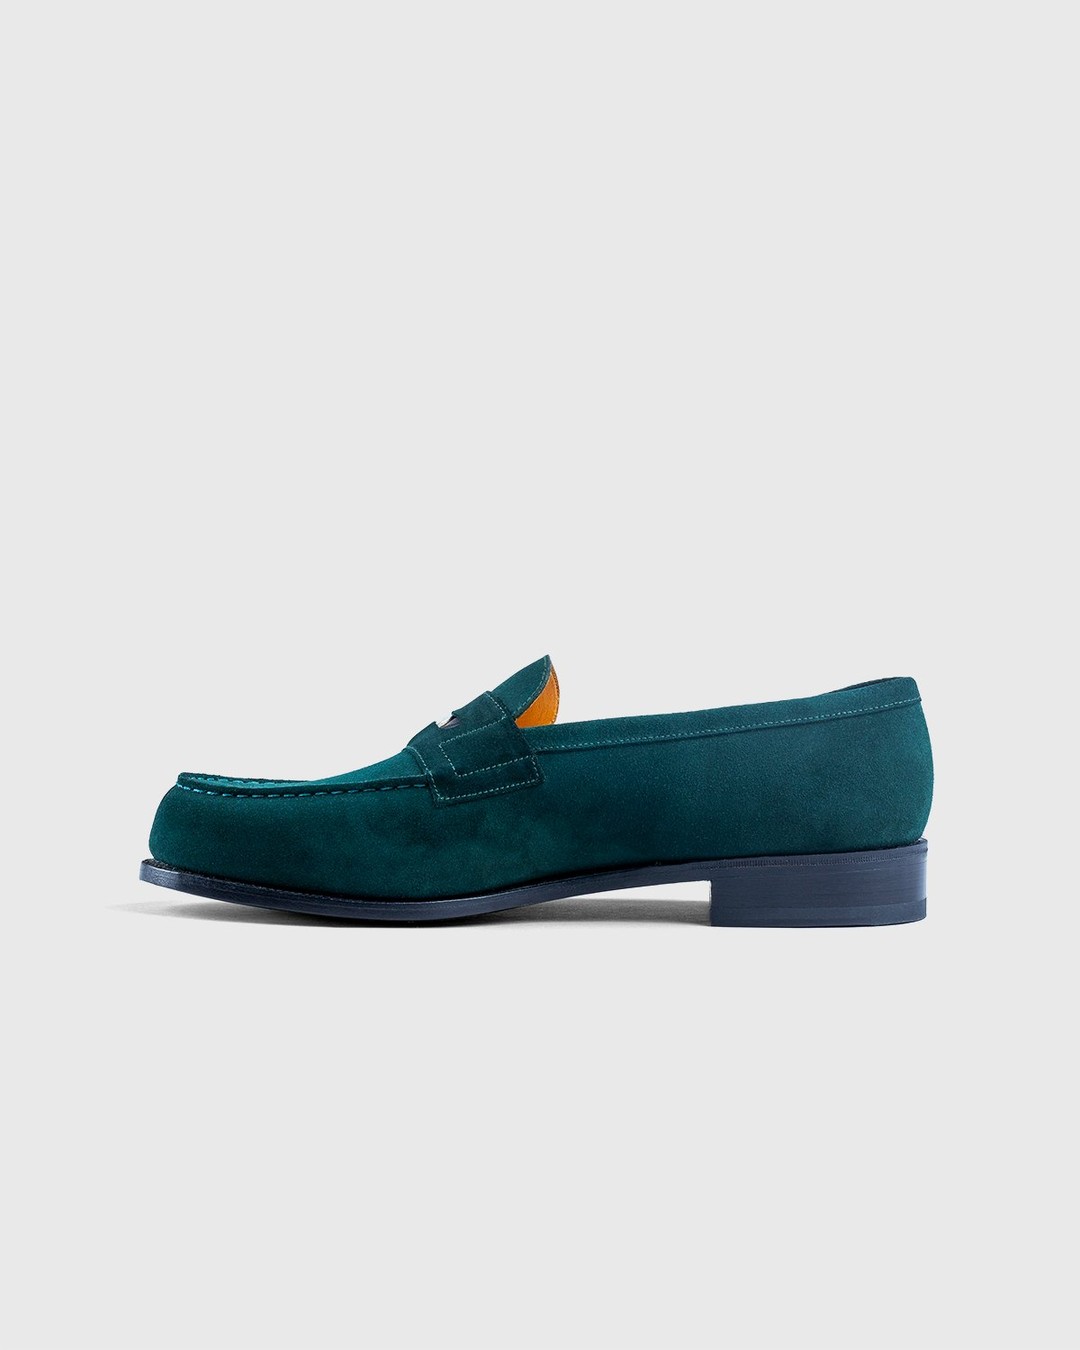 J.M. Weston x Highsnobiety – 180 'Penny' Loafer - Loafers - Green - Image 4